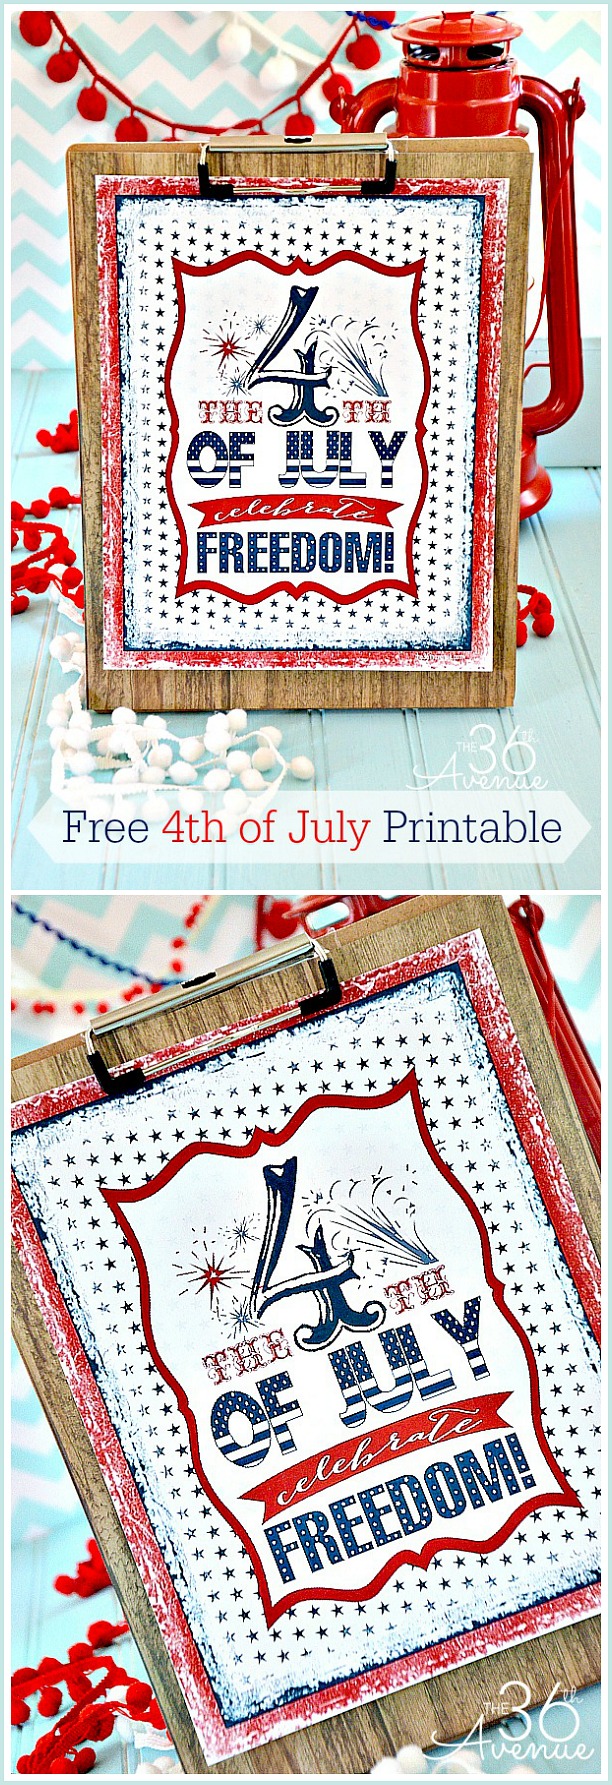 Fourth of July Free Printable & The Ultimate Red, White and Blue Roundup!  #ultimateredwhiteandblue